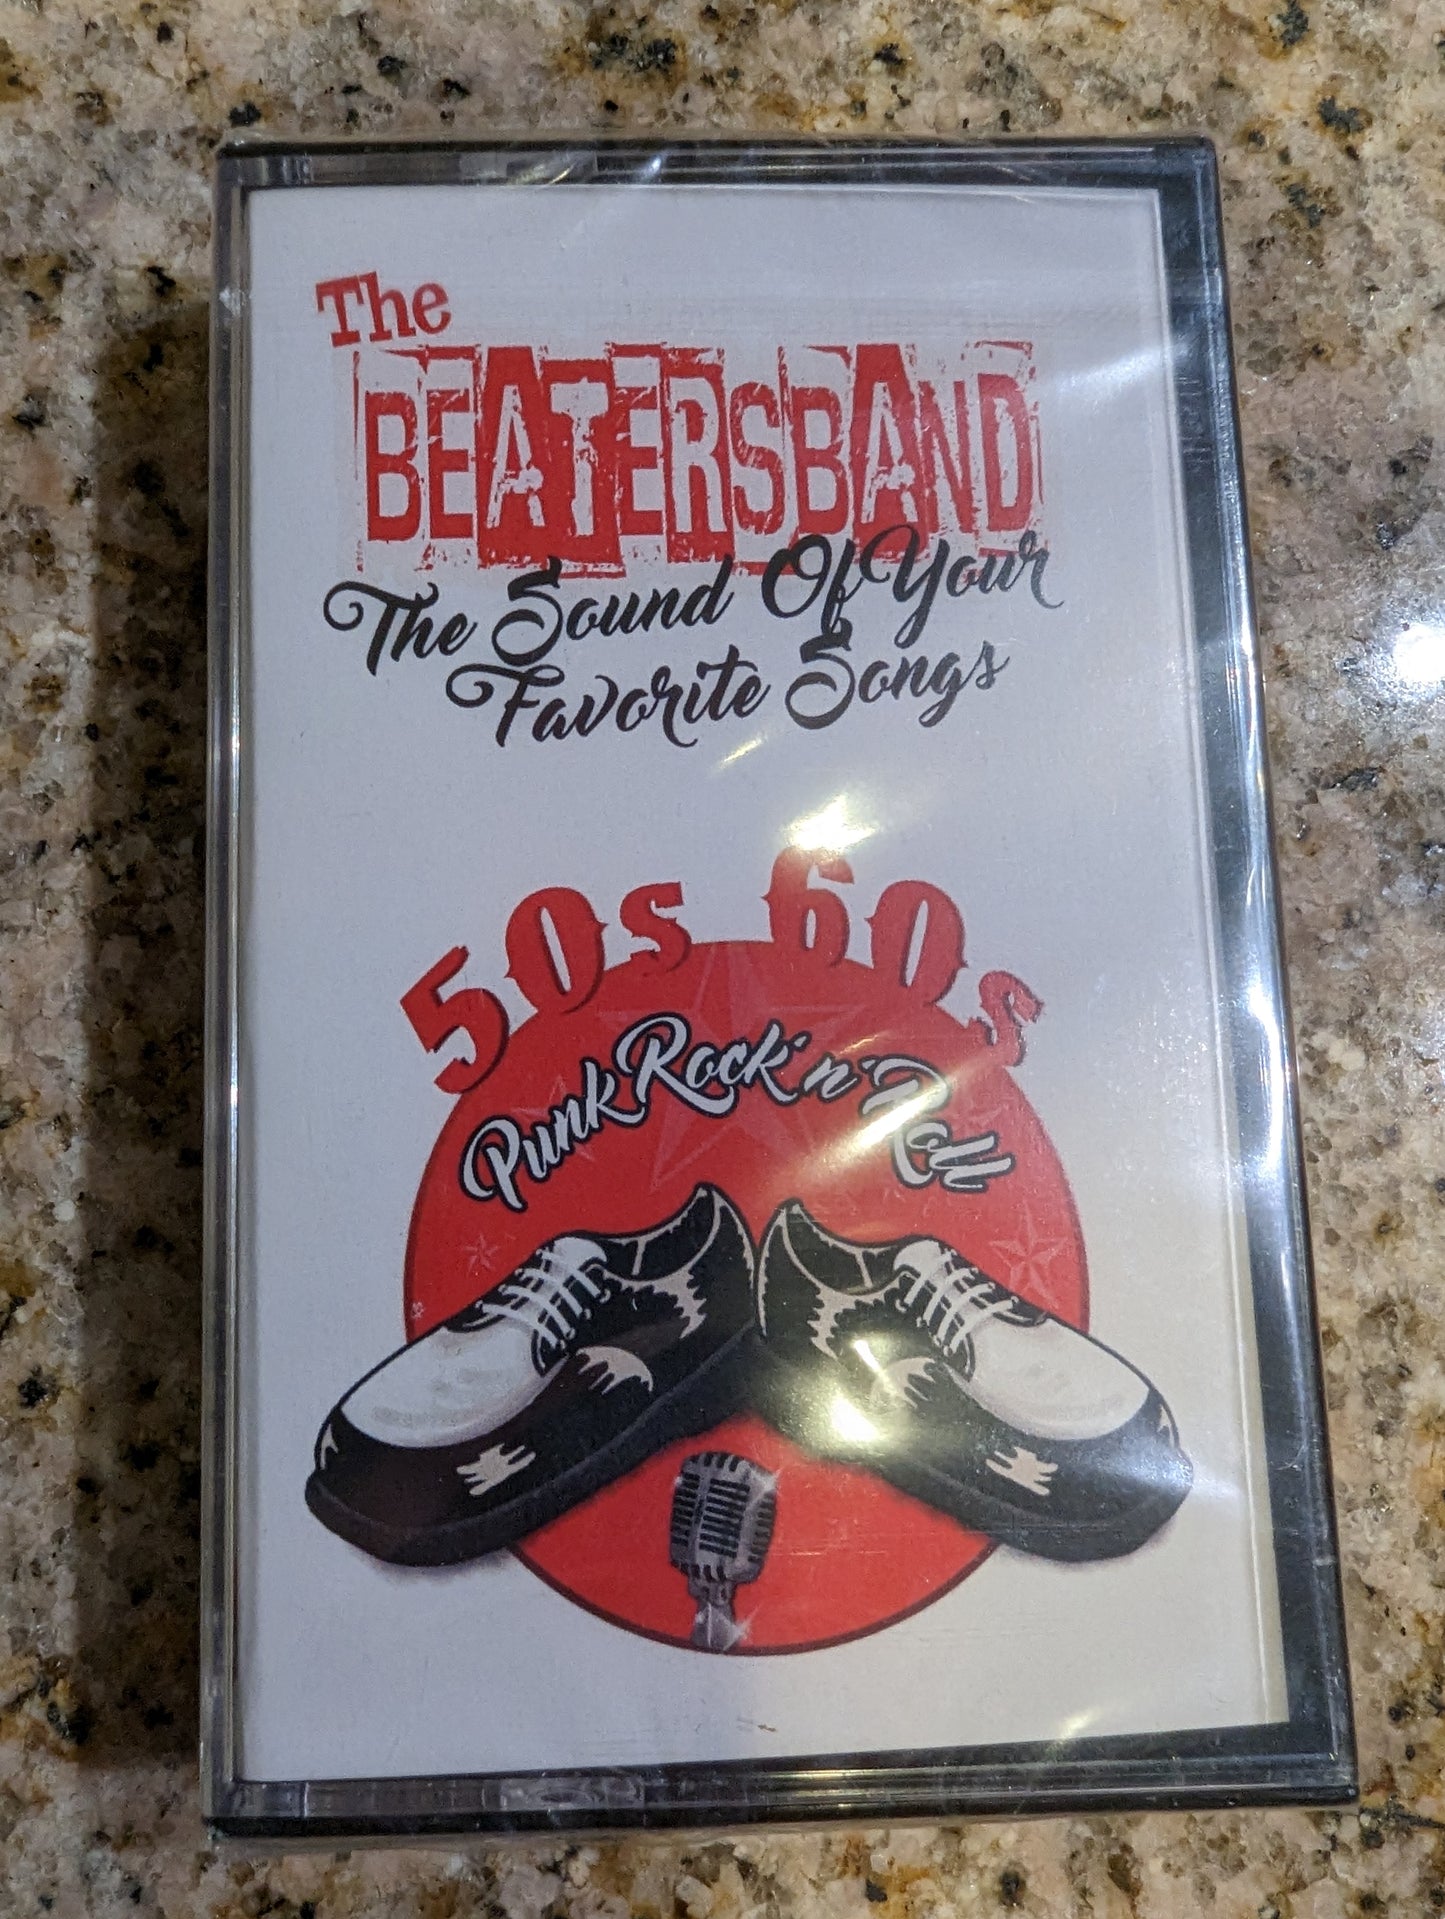 The BeatersBand "The Sound of Your Favorite Songs" cassette